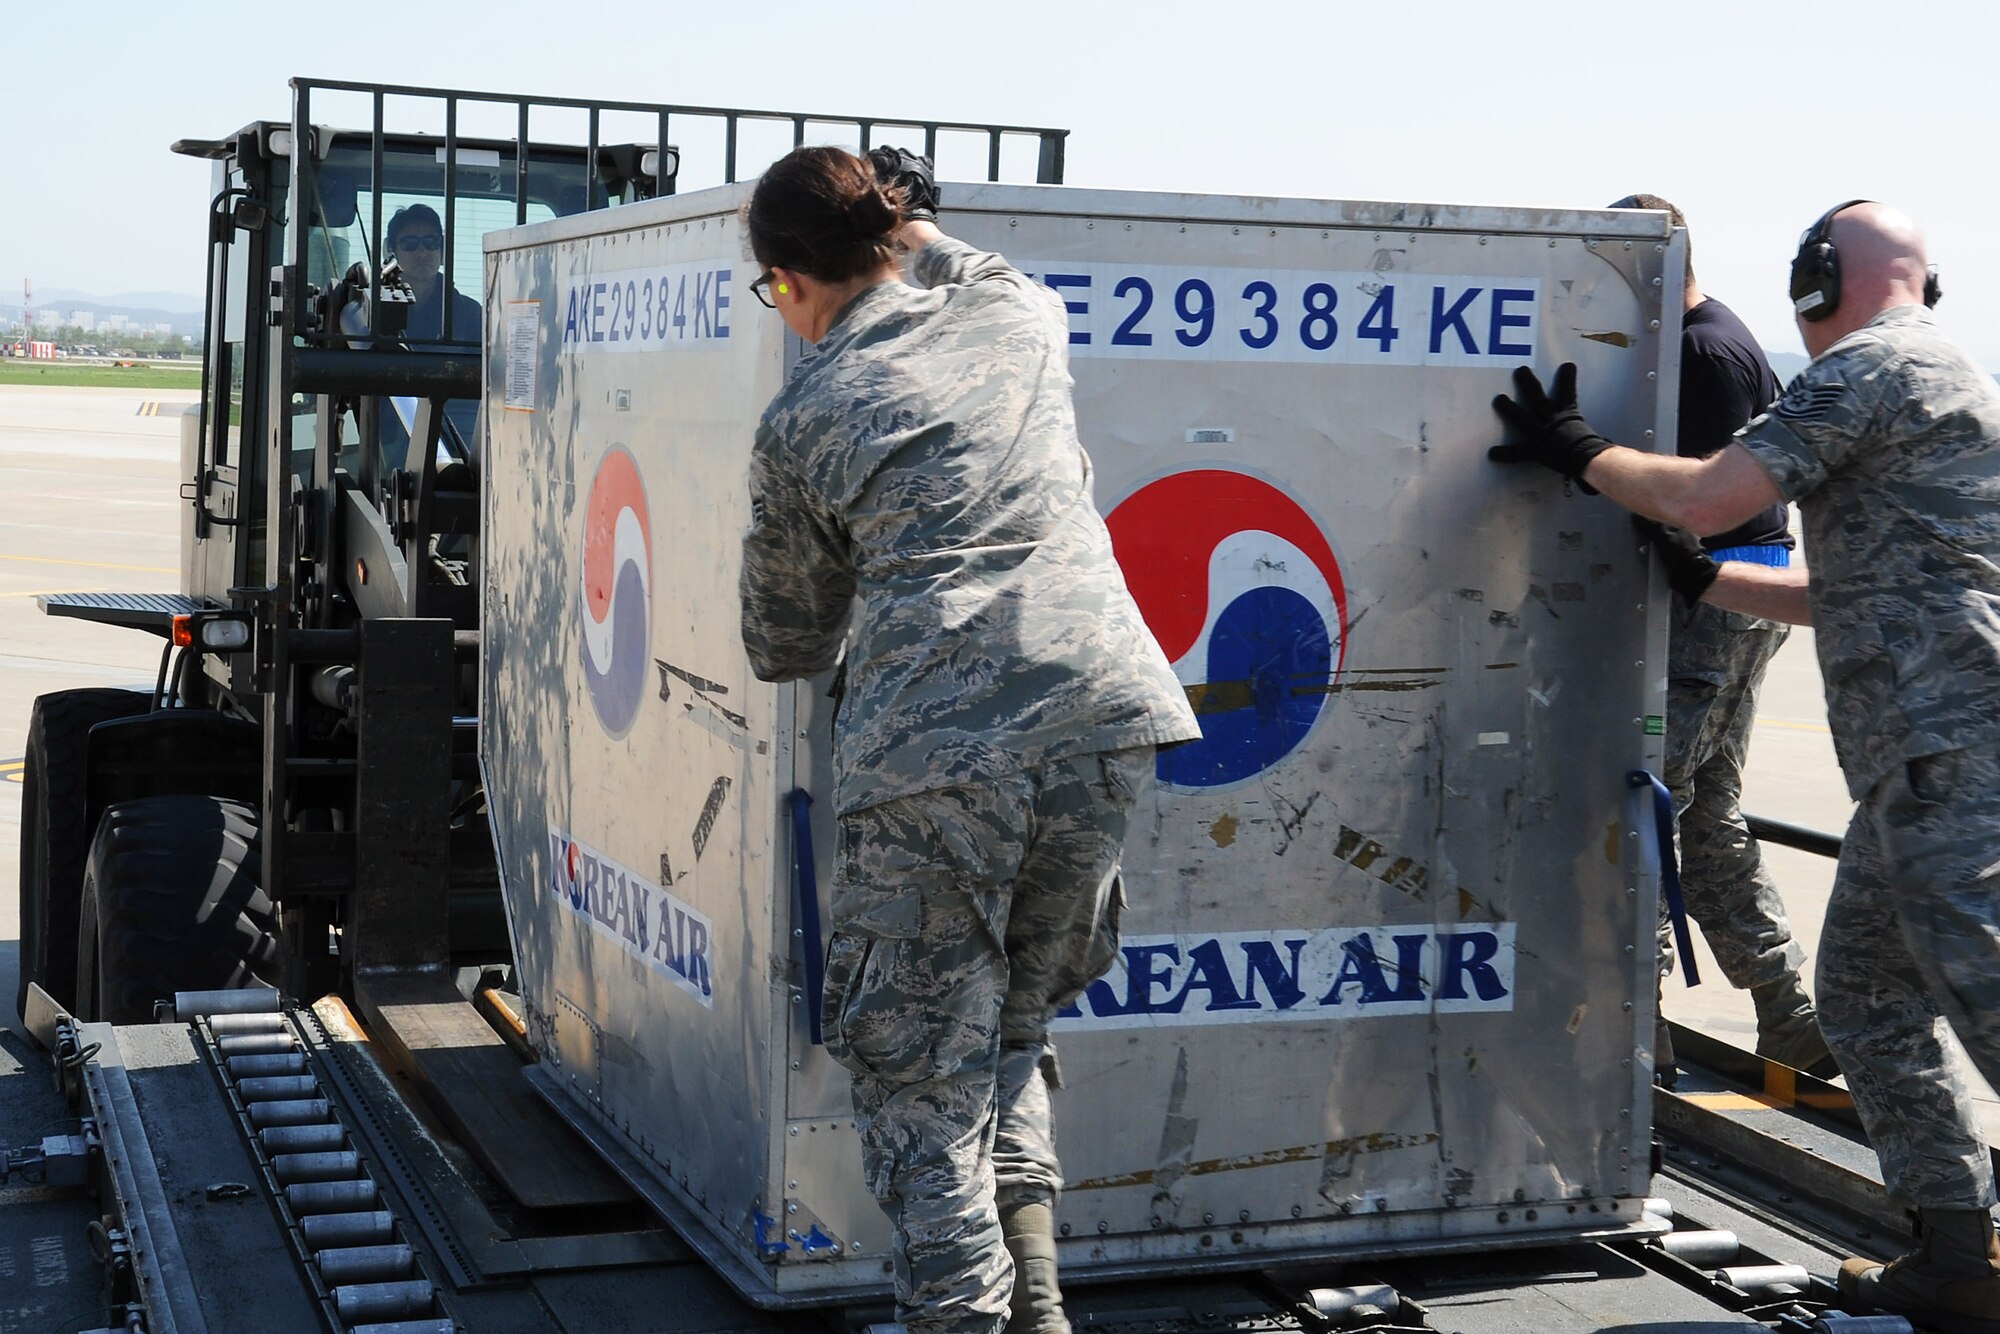 Personnel assigned to the 731st Air Mobility Squadron and 67th Aerial Port Squadron at Hill Air Force Base, Utah unload a Korean Air baggage container during the Mutual Airlift Support Agreement (MASA) exercise at Osan Air Base, Republic Of Korea May 4, 2018. The MASA demonstrates the alliance between the United States and ROK, which enabled the 731st AMS to process passengers and load personnel baggage onto a Korean commercial aircraft. (U.S. Air Force photo by Tech. Sgt. Ashley Tyler)